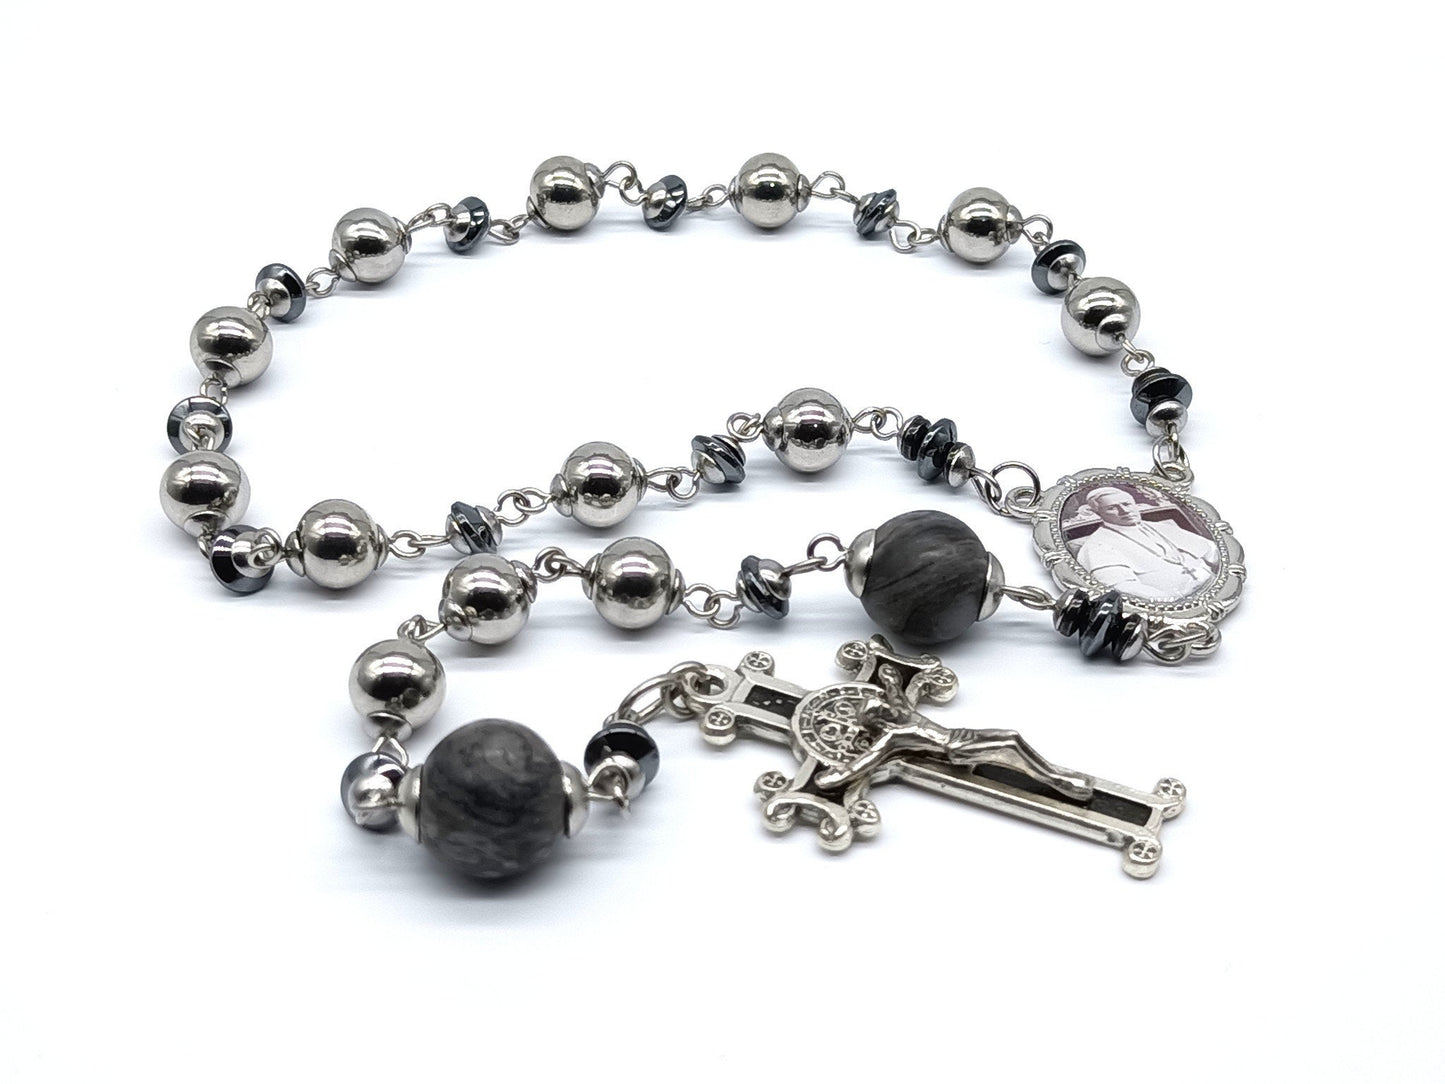 Saint Pope Pius X unique rosary beads single decade with stainless steel and gemstone beads, silver and black enamel St. Benedict crucifix and silver Pius X picture centre medal.